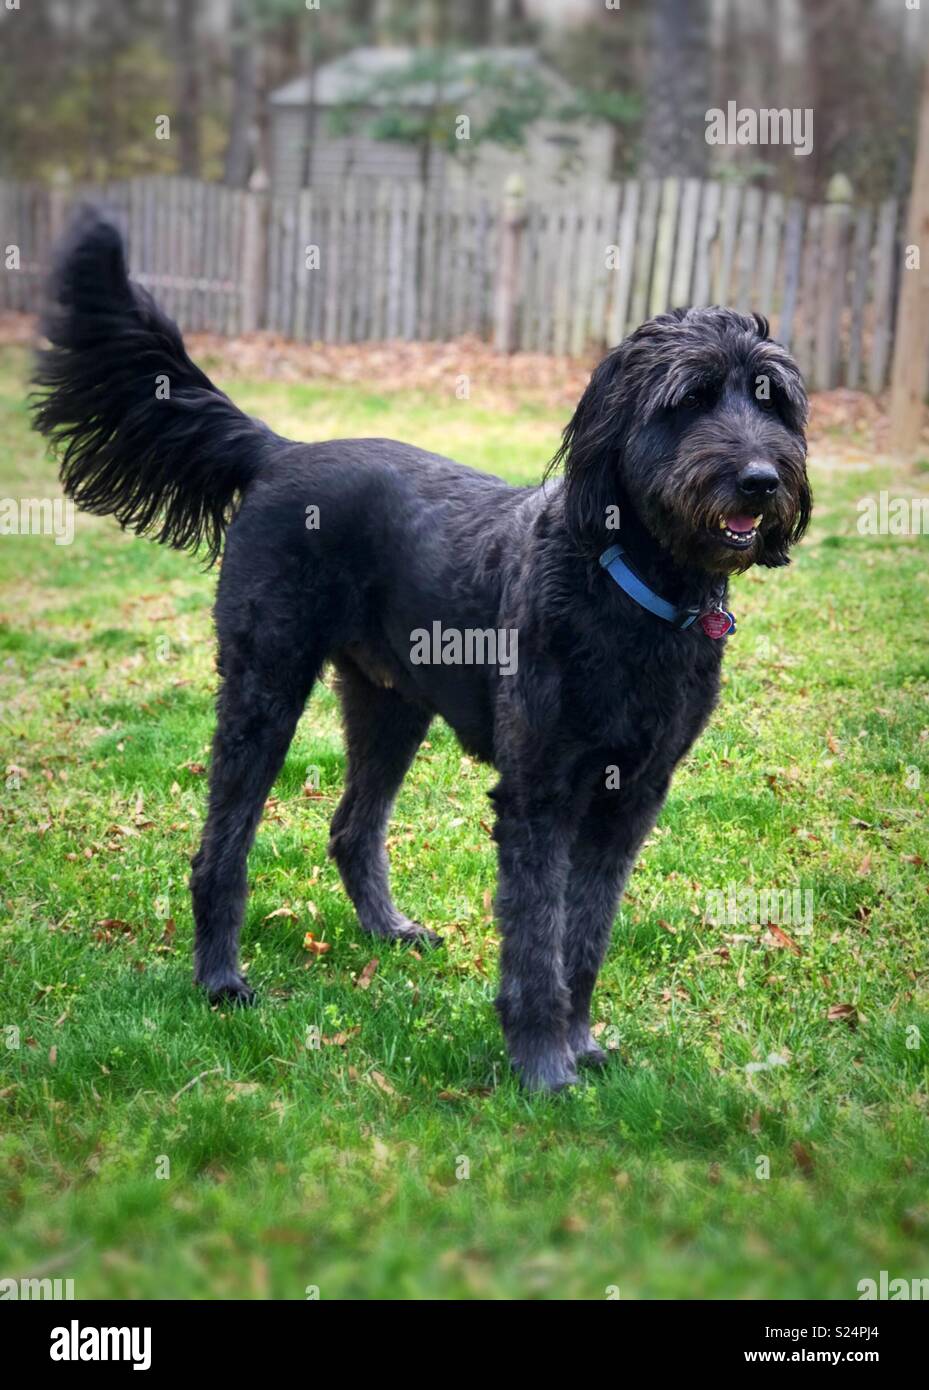 Black Australian Shepard Standard Poodle Mix Aussie Doodle Adult Male Dog Standing Cute Medium Thick Shaggy Hair Looking Calm In Grassy Field With Trees And Fence Stock Photo Alamy